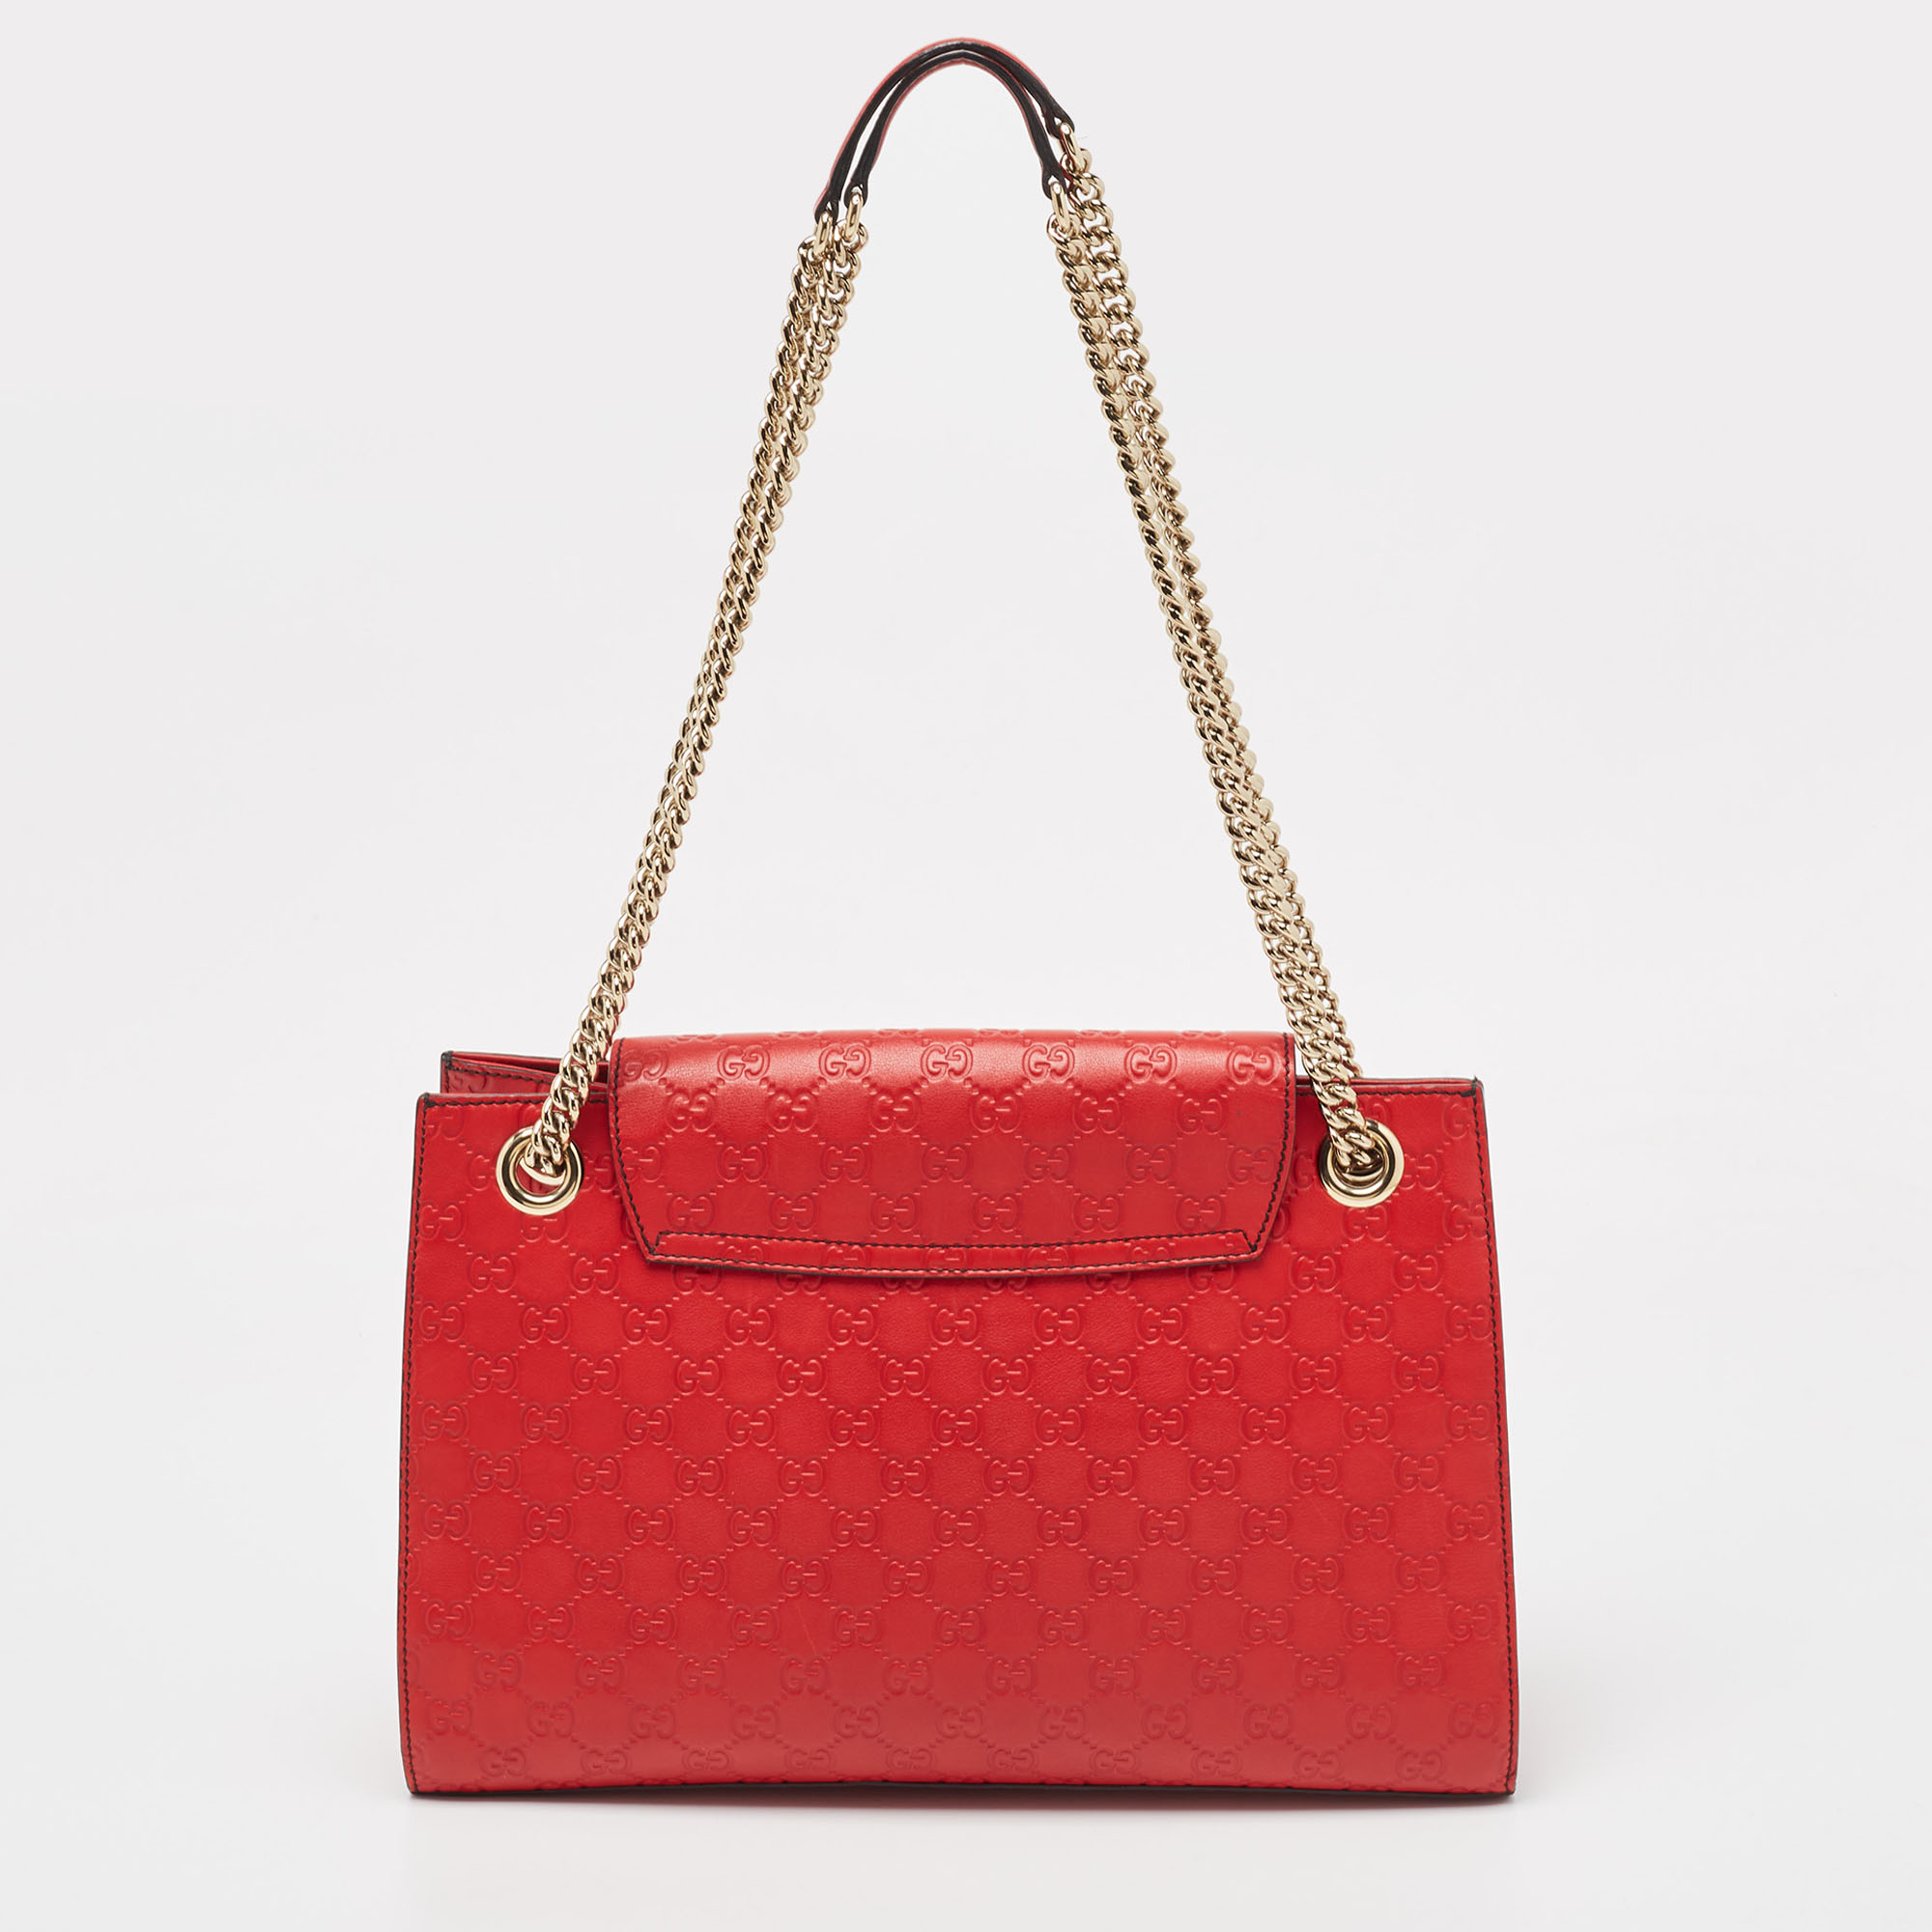 Gucci Red Guccissima Leather Emily Chain Shoulder Bag